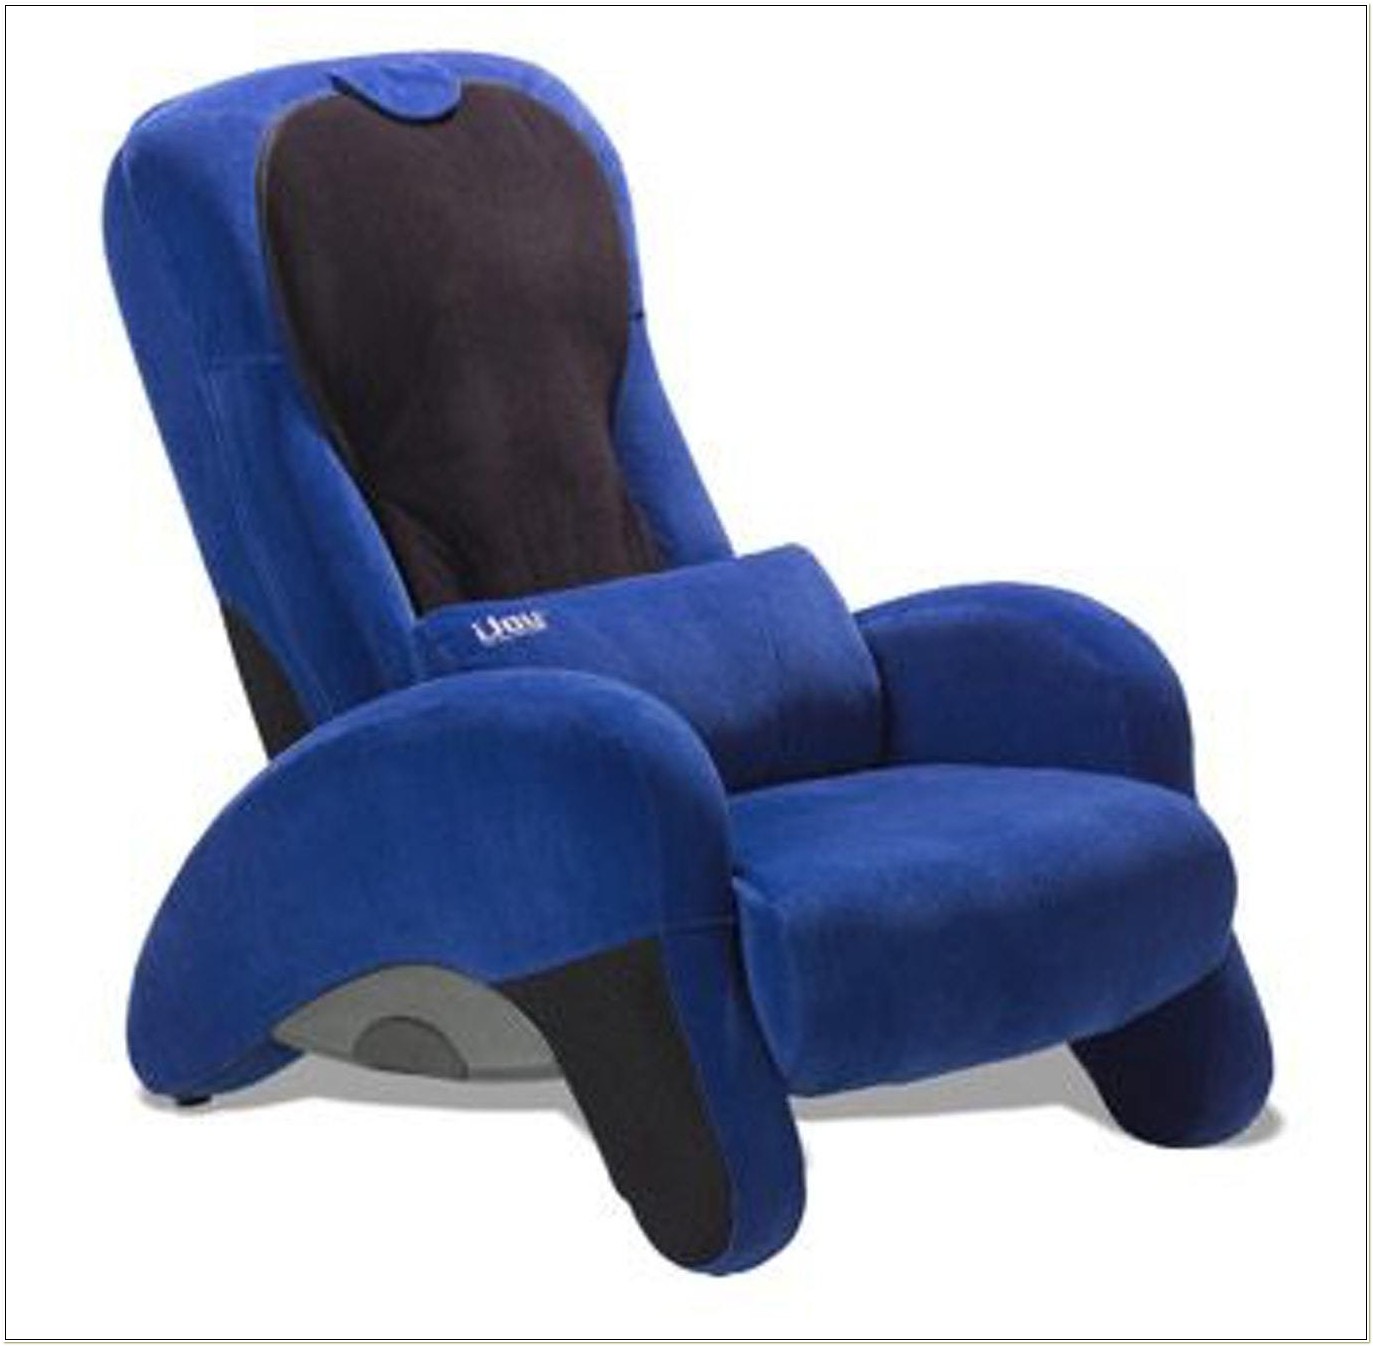 Ijoy 100 Robotic Massage Chair Blue - Chairs : Home Decorating Ideas #